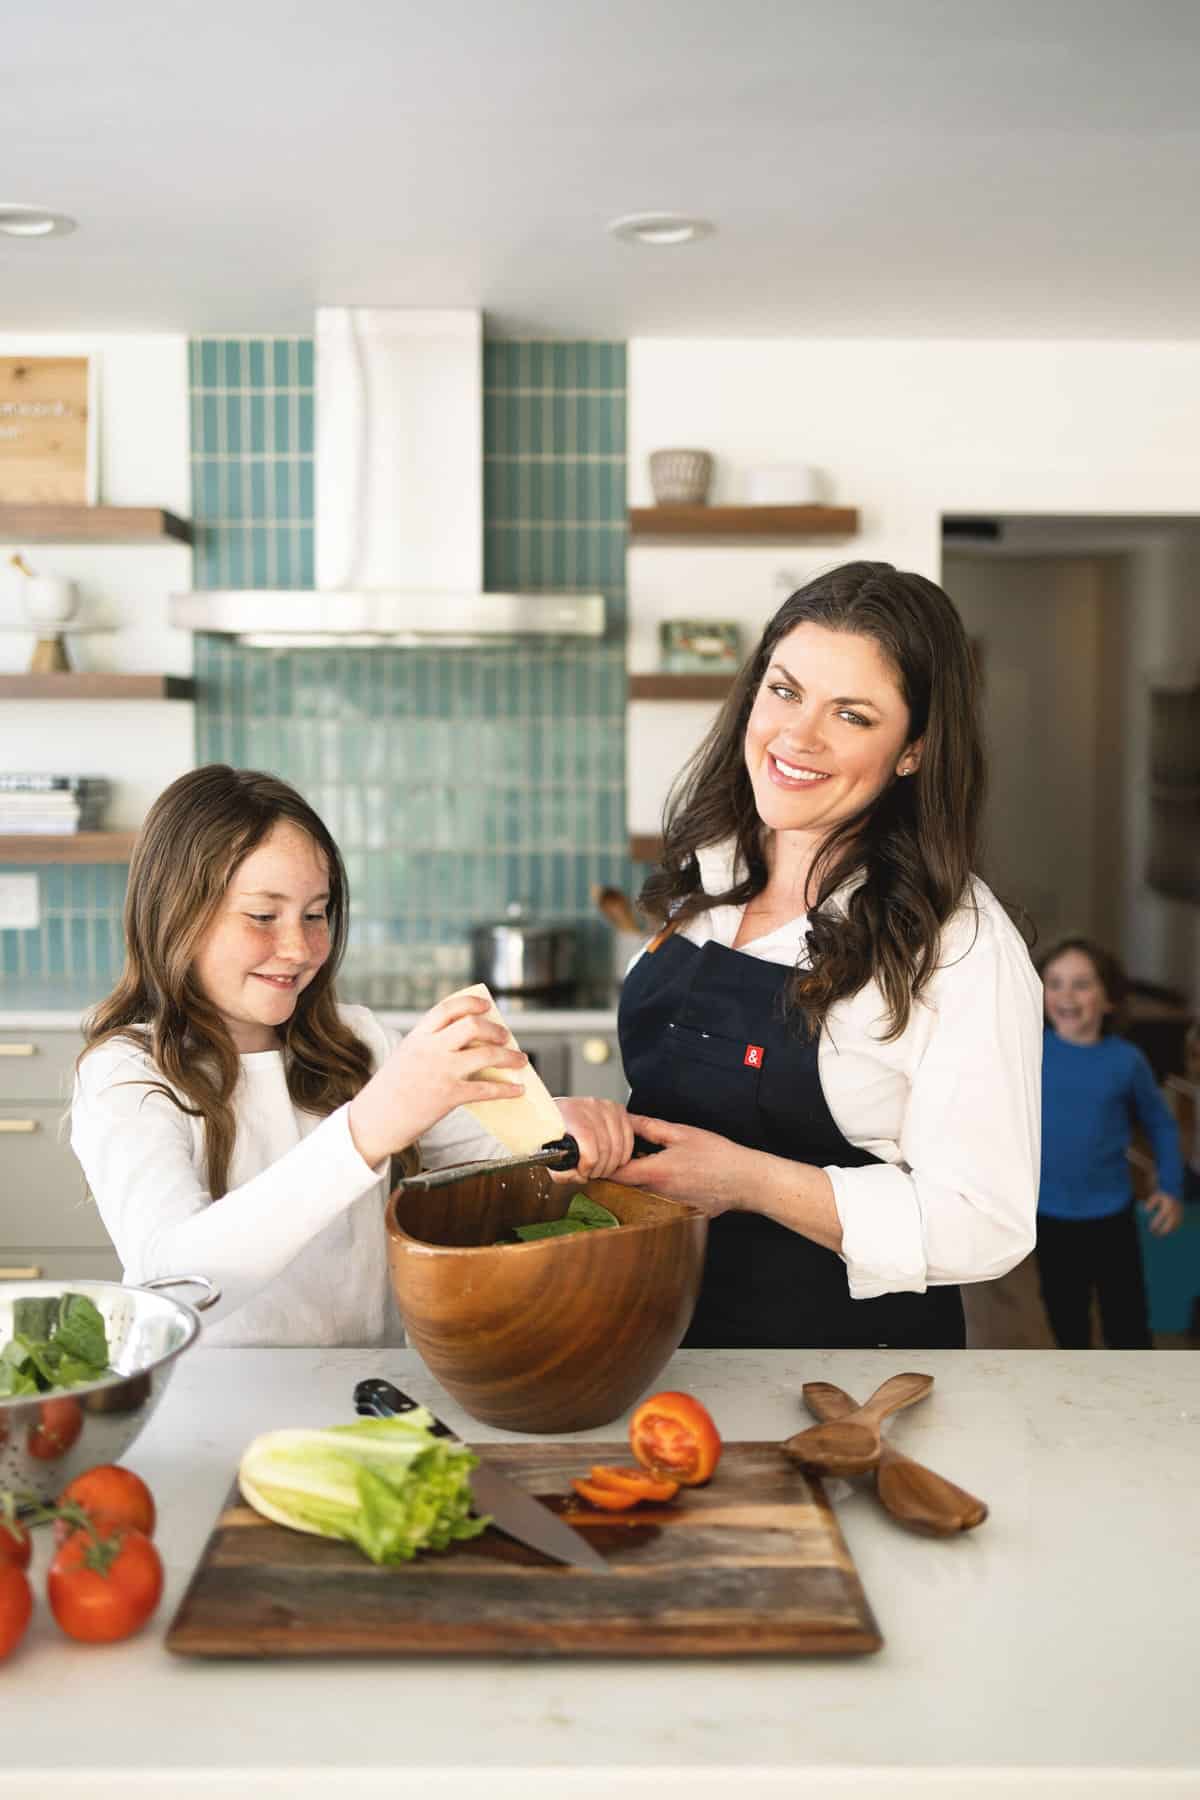 amanda scarlati in the kitchen with a girl and boy making a salad.